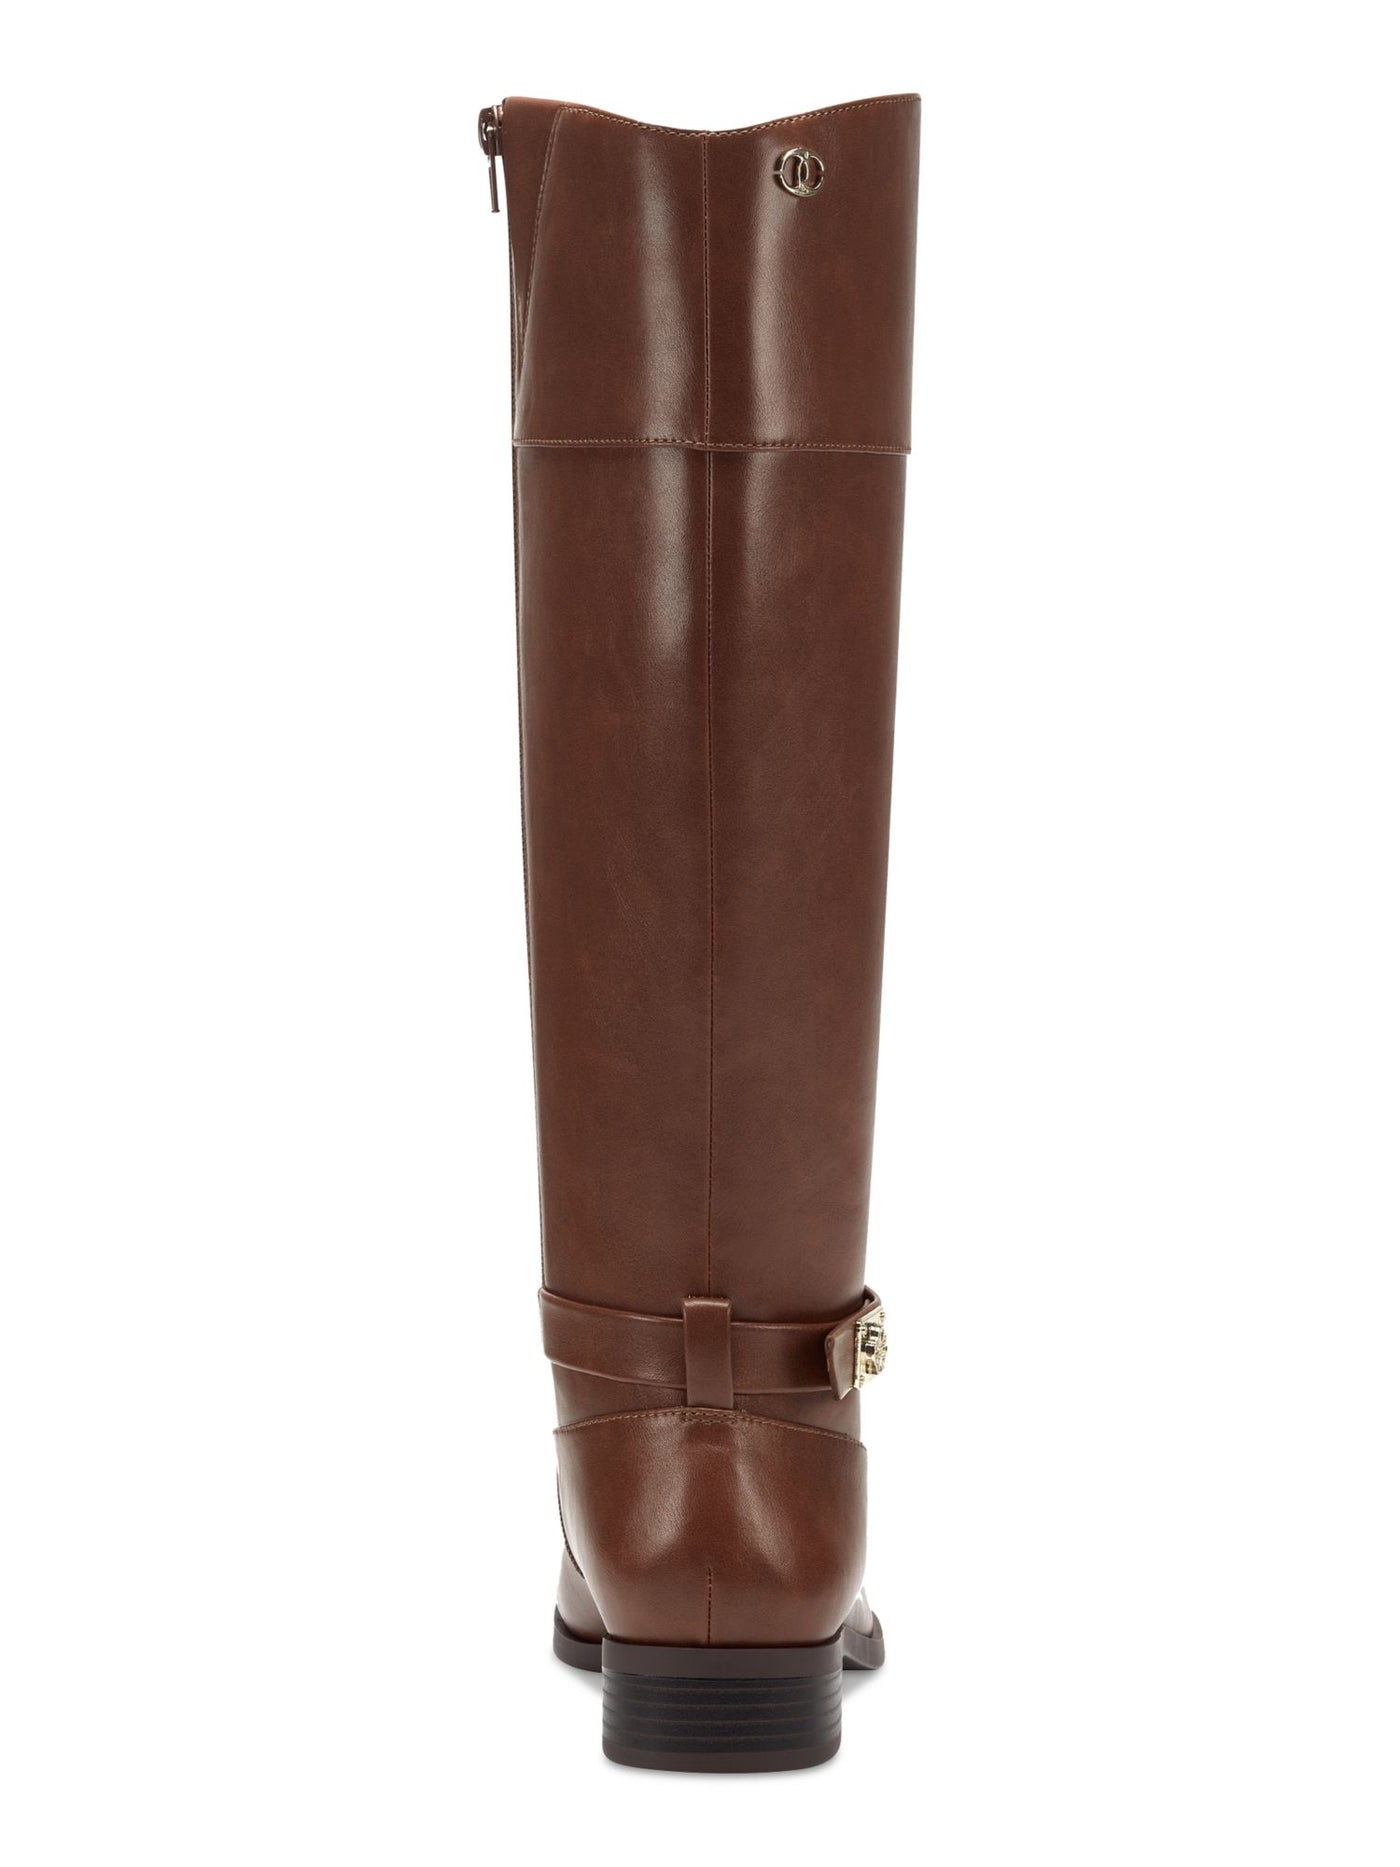 CHARTER CLUB Womens Brown Buckle Accent Johannes Round Toe Zip-Up Riding Boot 10 M